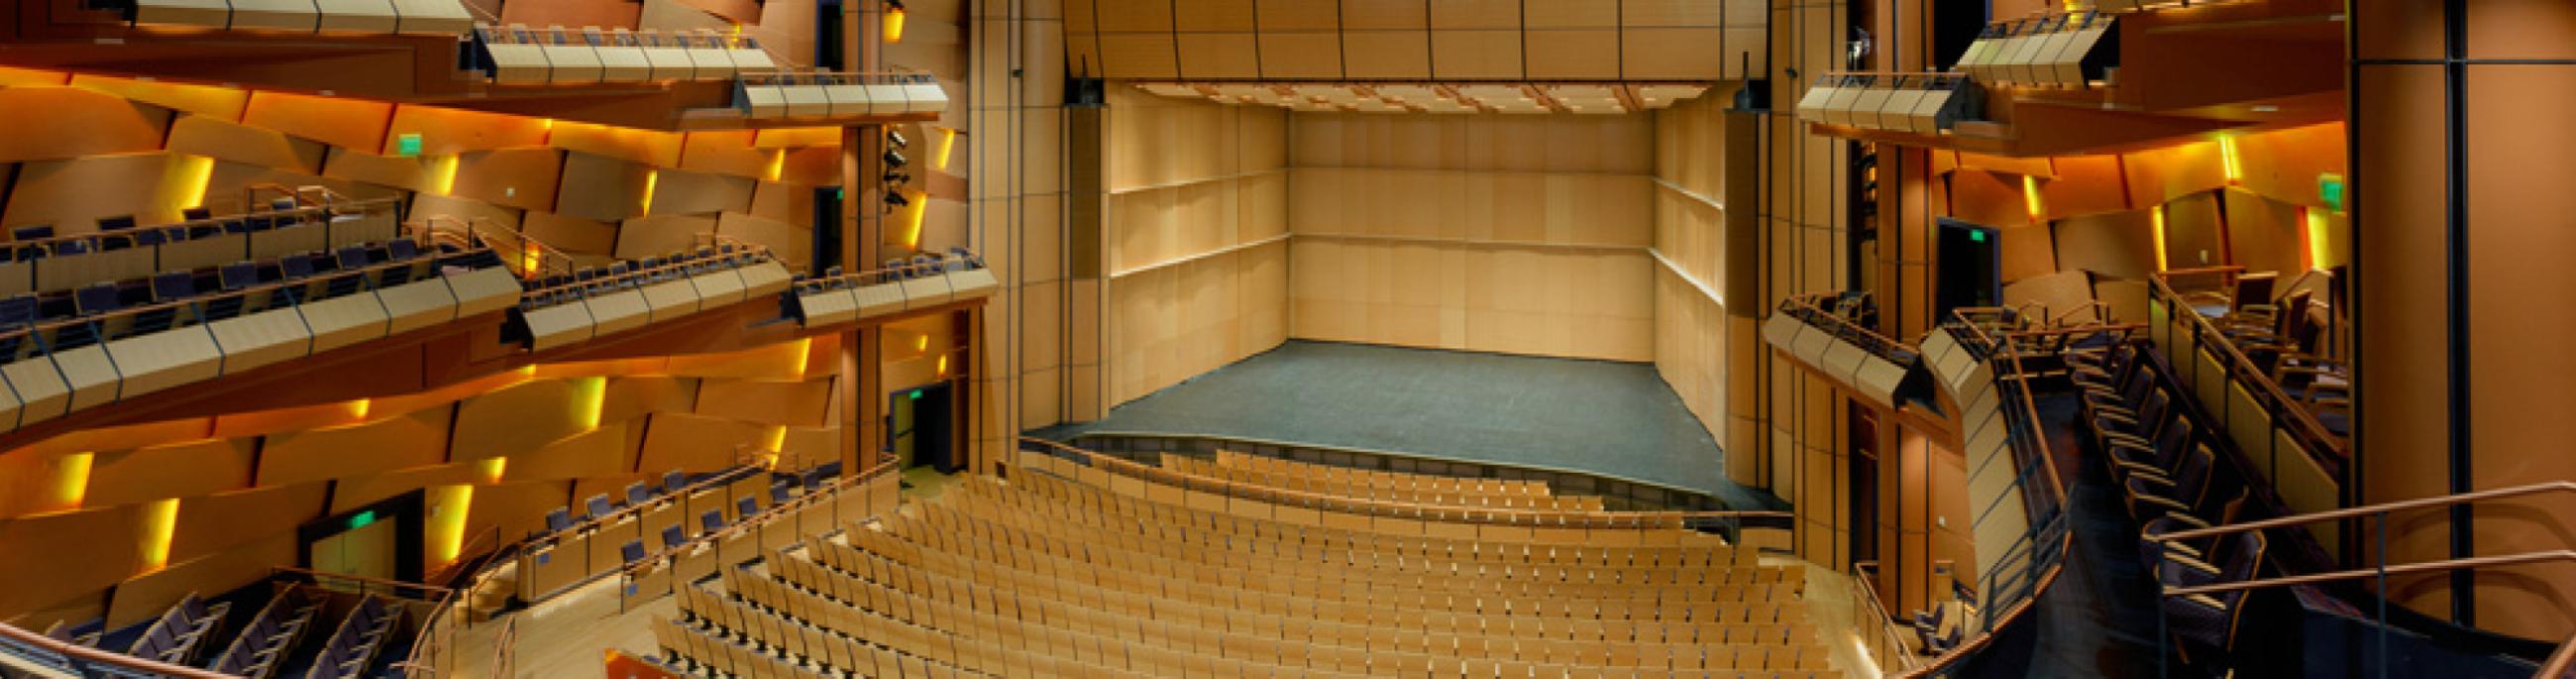 Panoramic photo of a theatre with the main stage at the center and seats surrounding it